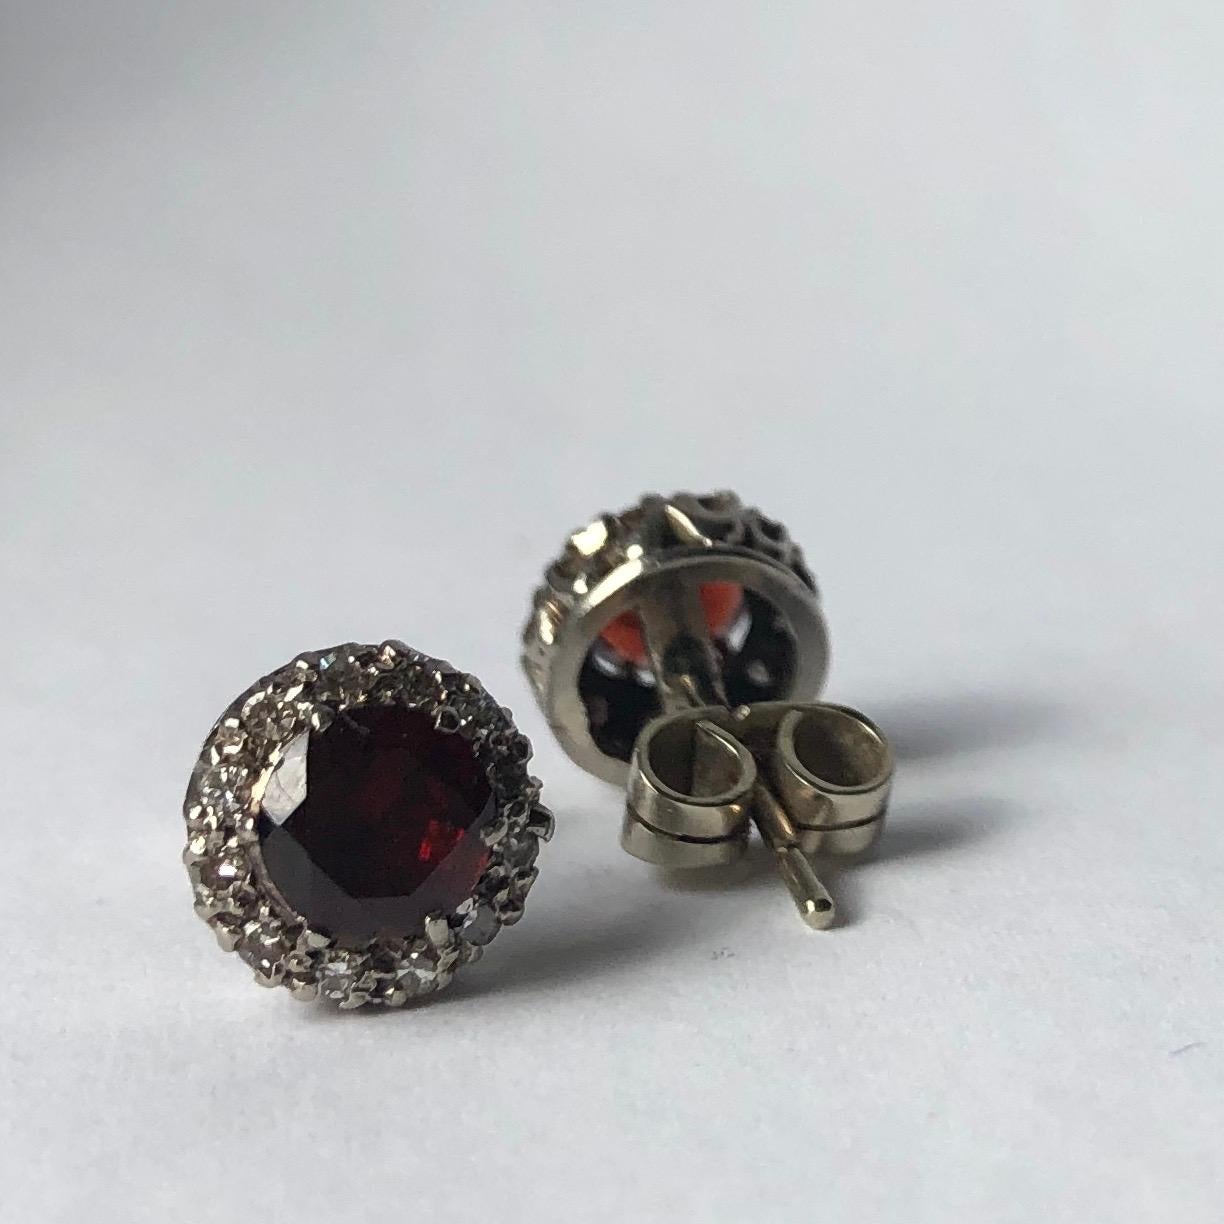 The 75pt garnets at the centre of these clusters are a beautiful deep, rich red colour and are surrounded by a halo of glistening diamonds. The diamonds total approximately 10pts per earring.

Cluster Diameter: 8.5mm 

Weight: 2.8g
